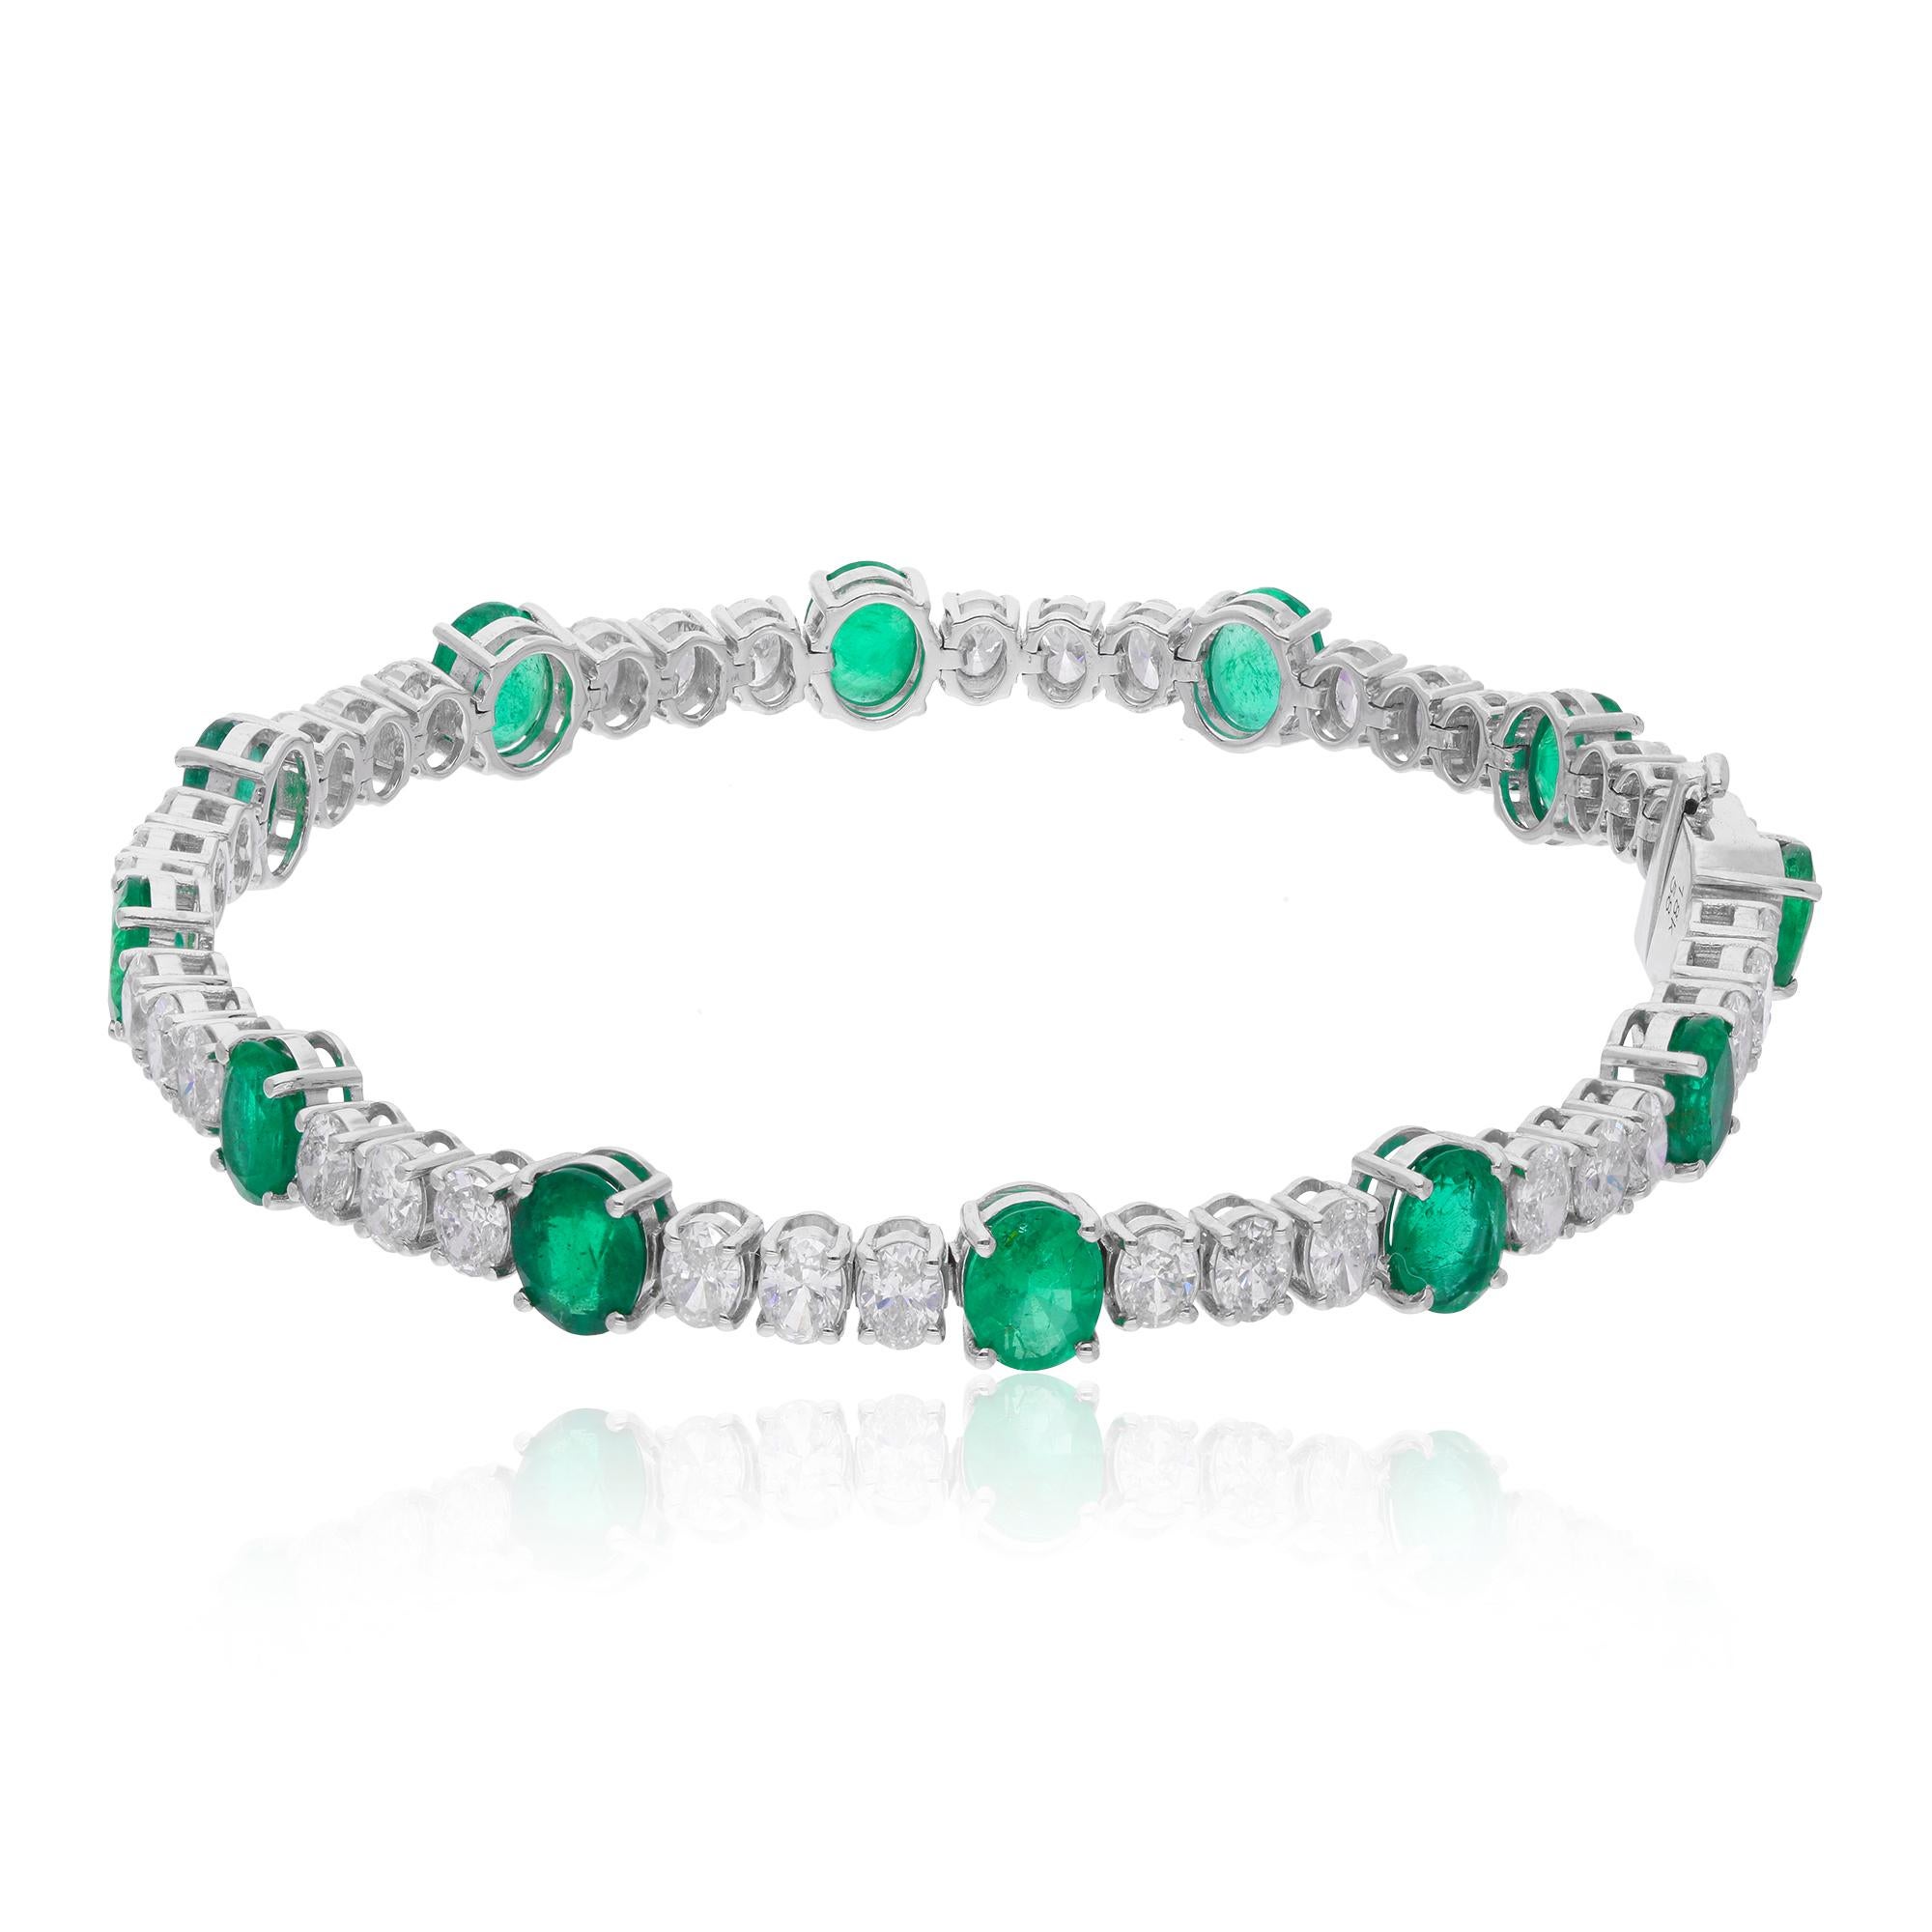 Immerse yourself in the allure of luxury with this exquisite Oval Shape Zambian Emerald Diamond Bracelet, meticulously handcrafted in 18 karat white gold. This stunning piece of jewelry features a captivating array of oval-shaped Zambian emeralds,